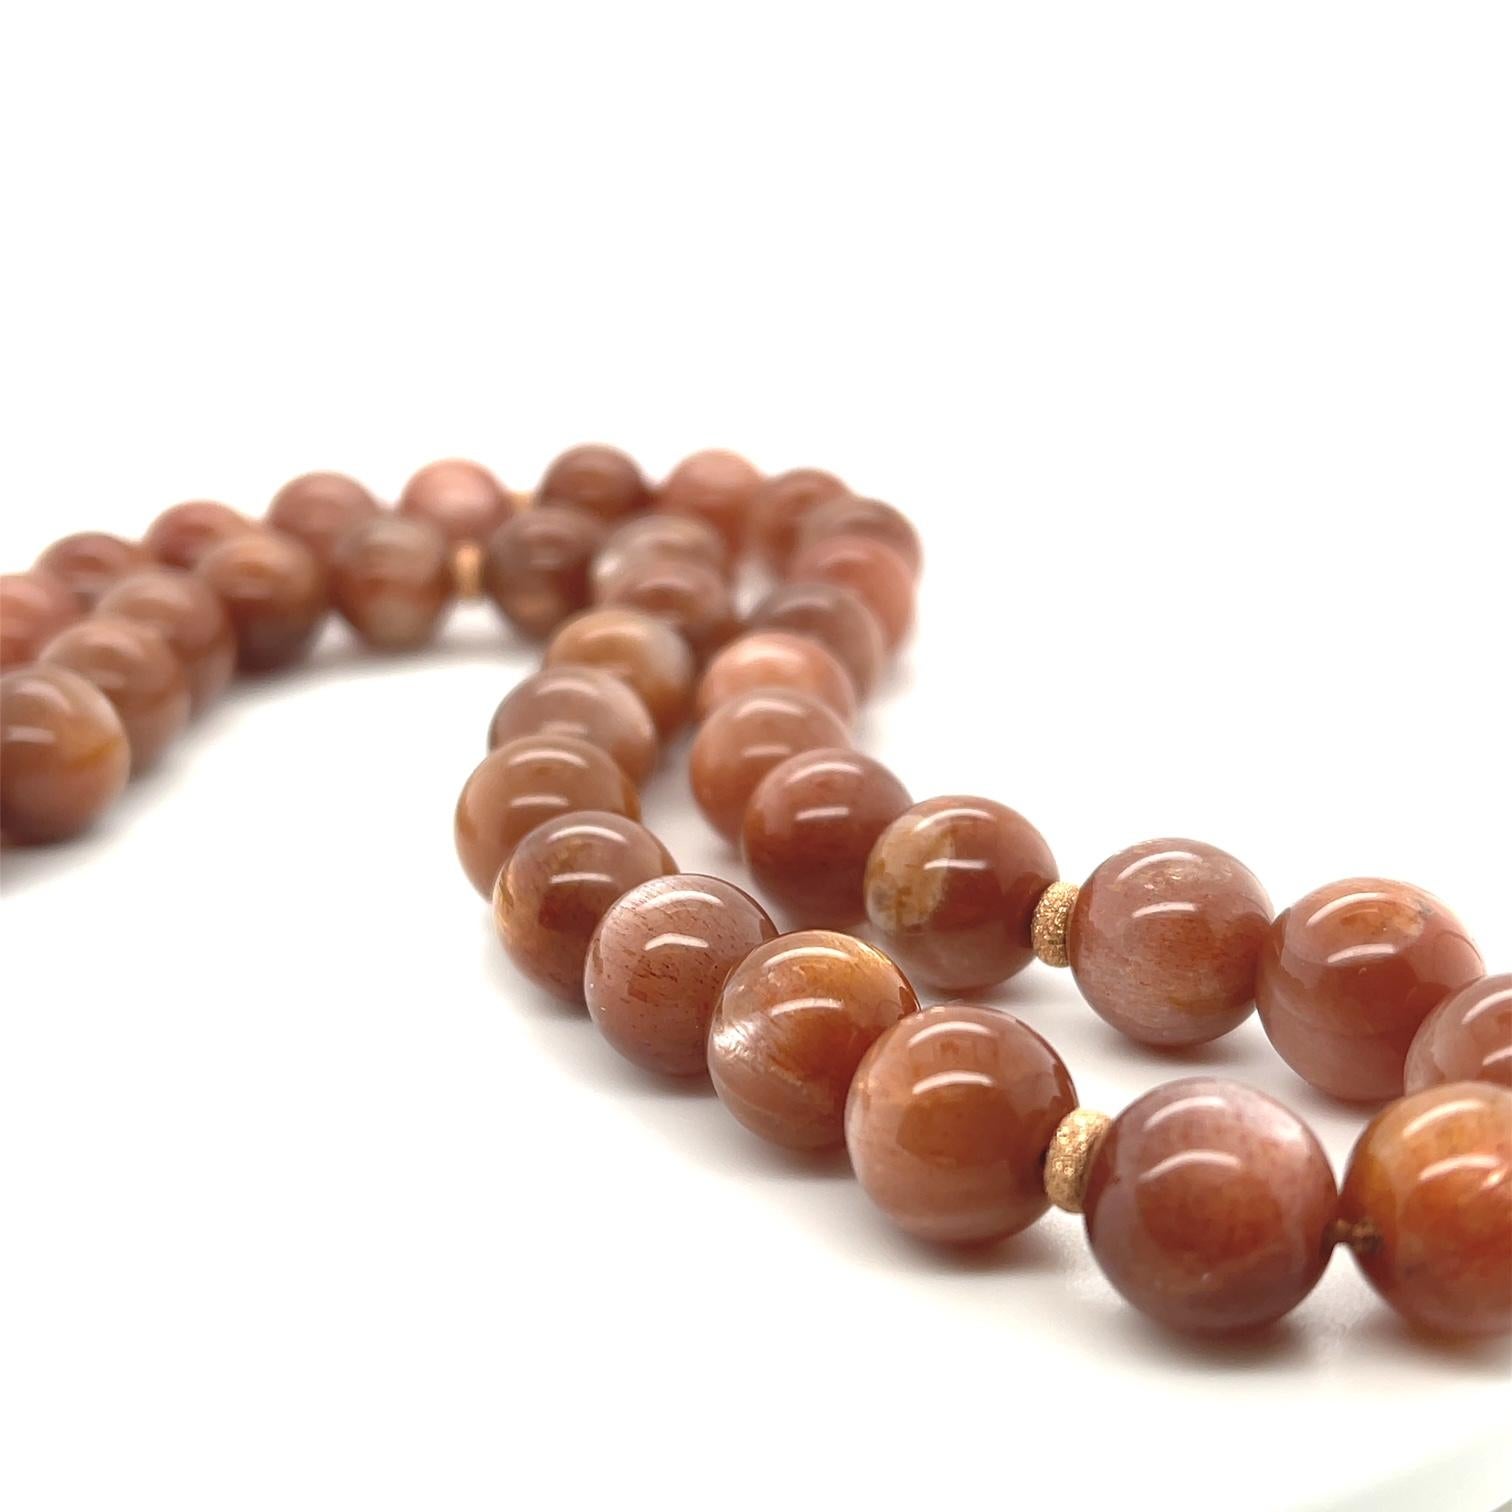 This luscious strand of radiant, bronze-colored beads looks like it was kissed by the sun! Fine quality, beautifully matched sunstone beads with their shimmering, frosted glow will complement both warm and cool tones, and their mahogany hues are